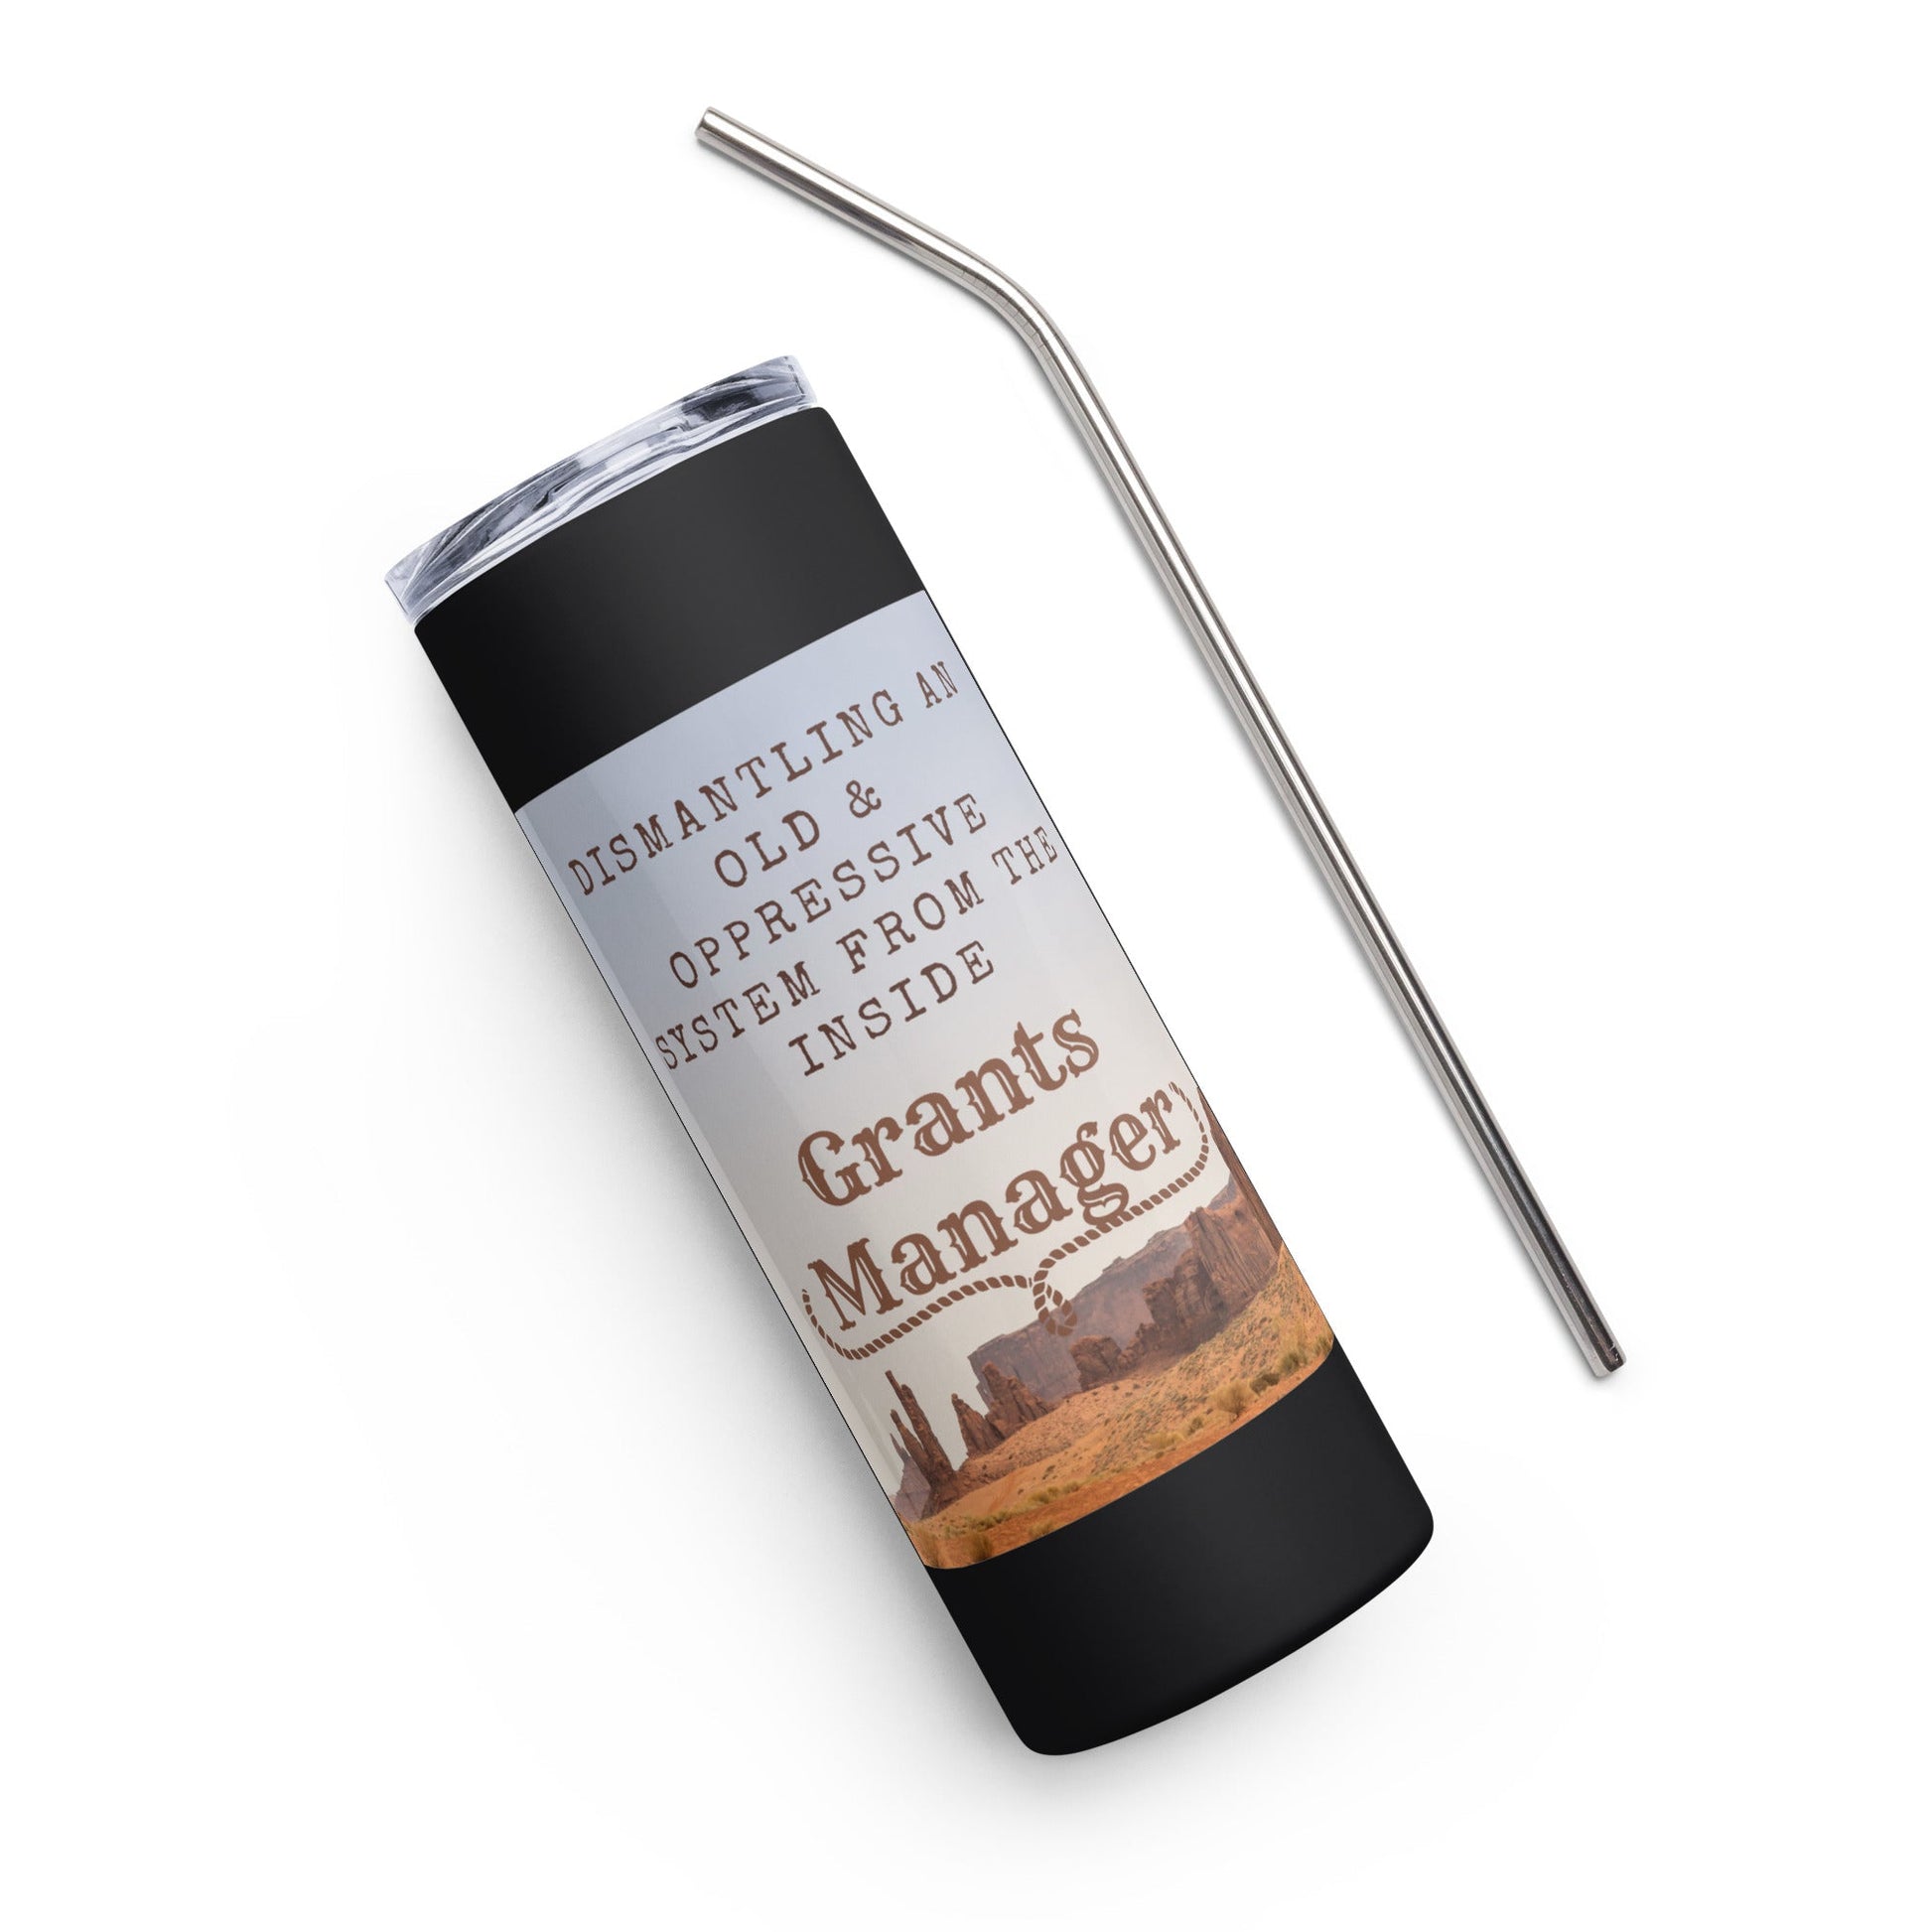 Old West Yellowstone Grants Manager Stainless steel tumbler